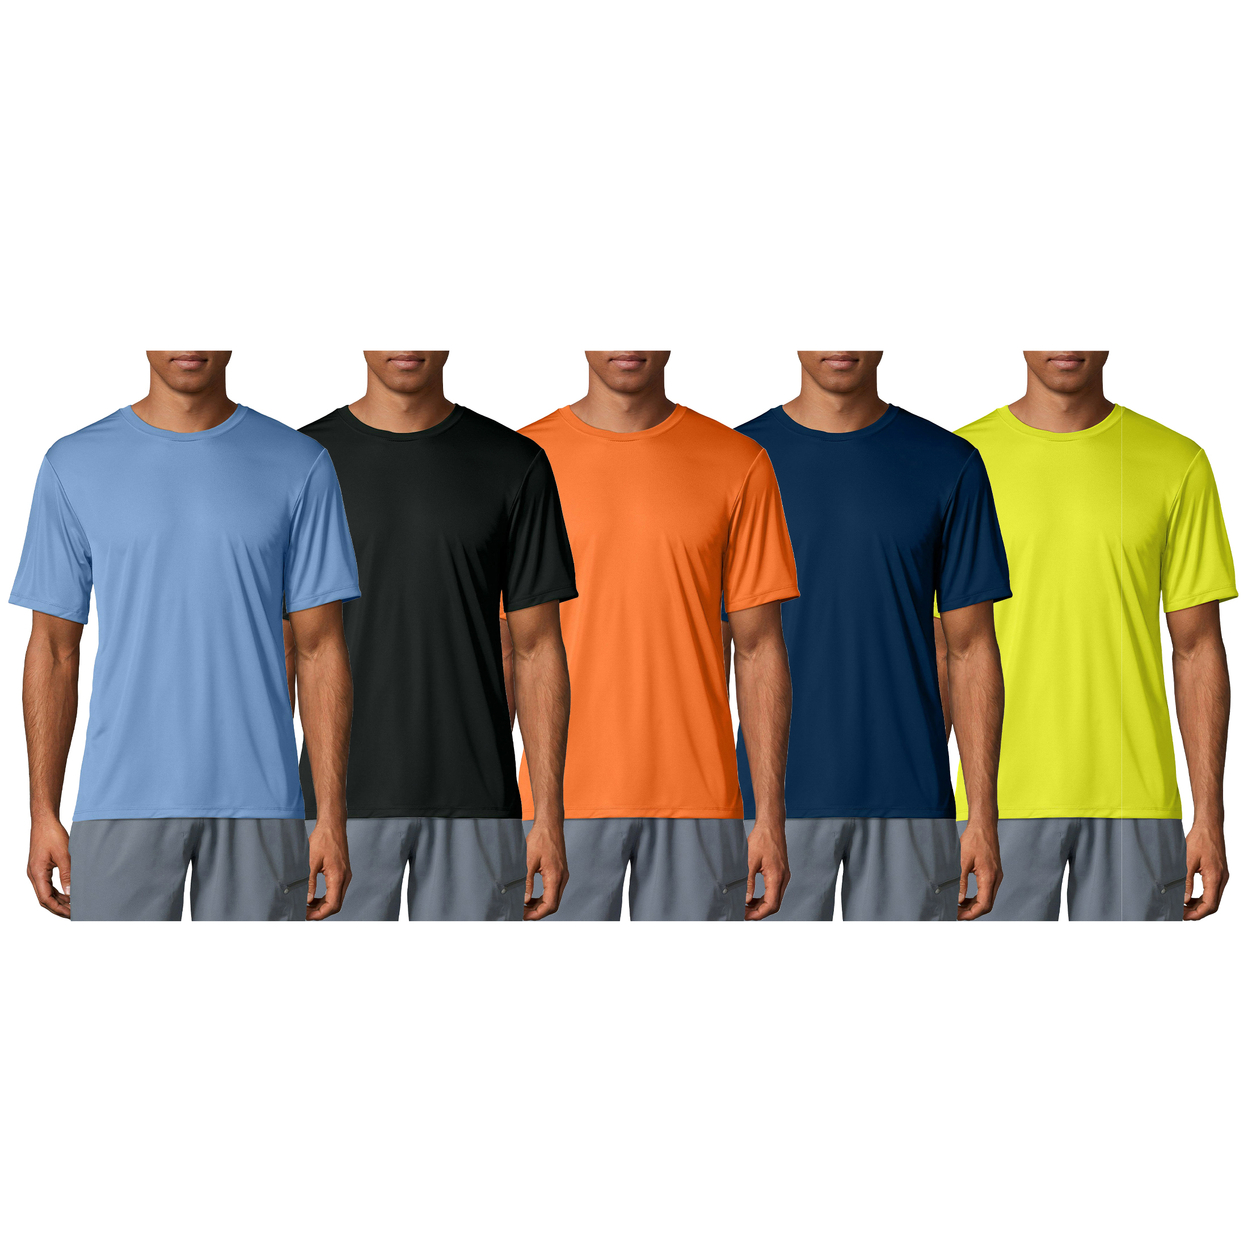 6-Pack: Men's Moisture Wicking Cool Dri-Fit Performance Short Sleeve Crew Neck T-Shirts - X-large